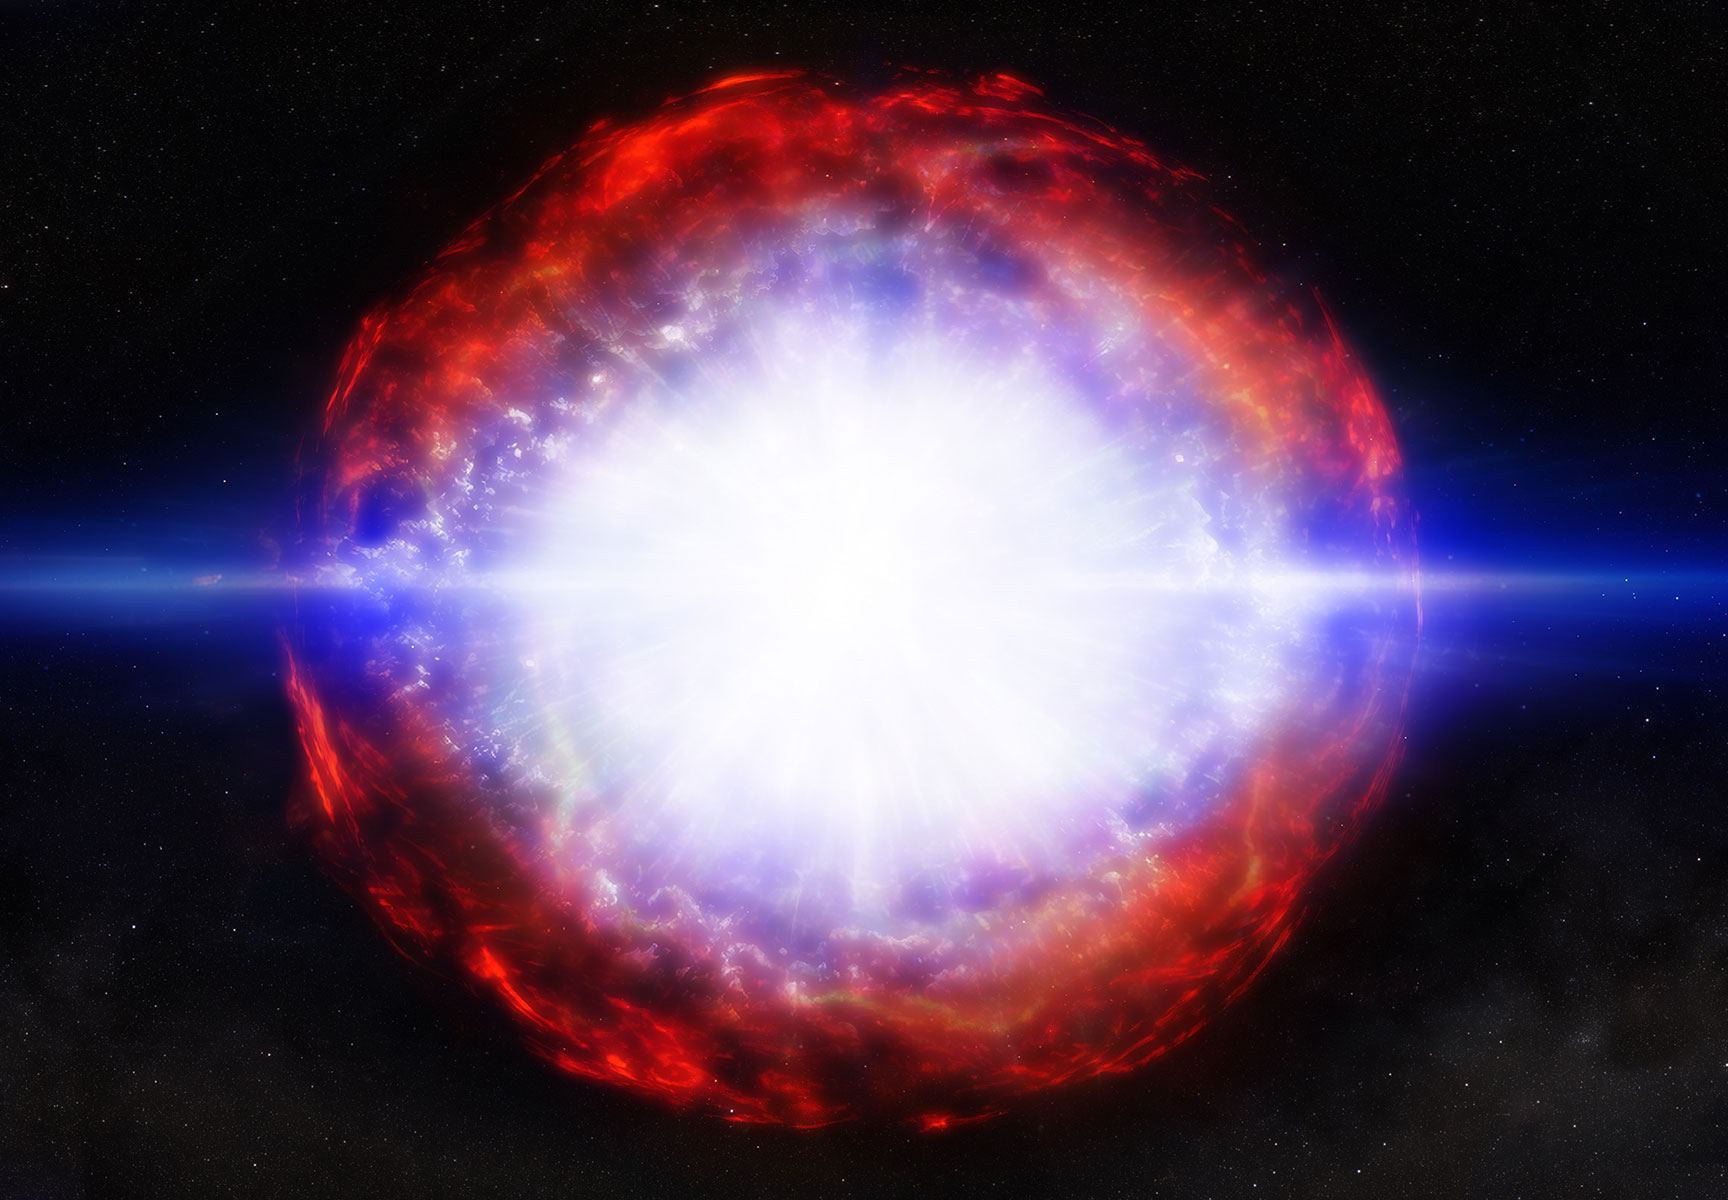 Artist's conception of SN 2023ixf. One of the nearest Type II supernovae in a decade and among the brightest to date, SN 2023ixf is a young supernova. Its progenitor star exploded and the supernova was discovered earlier this year by amateur astronomer K?ichi Itagaki of Yamagata, Japan. Credit: Melissa Weiss/CfA